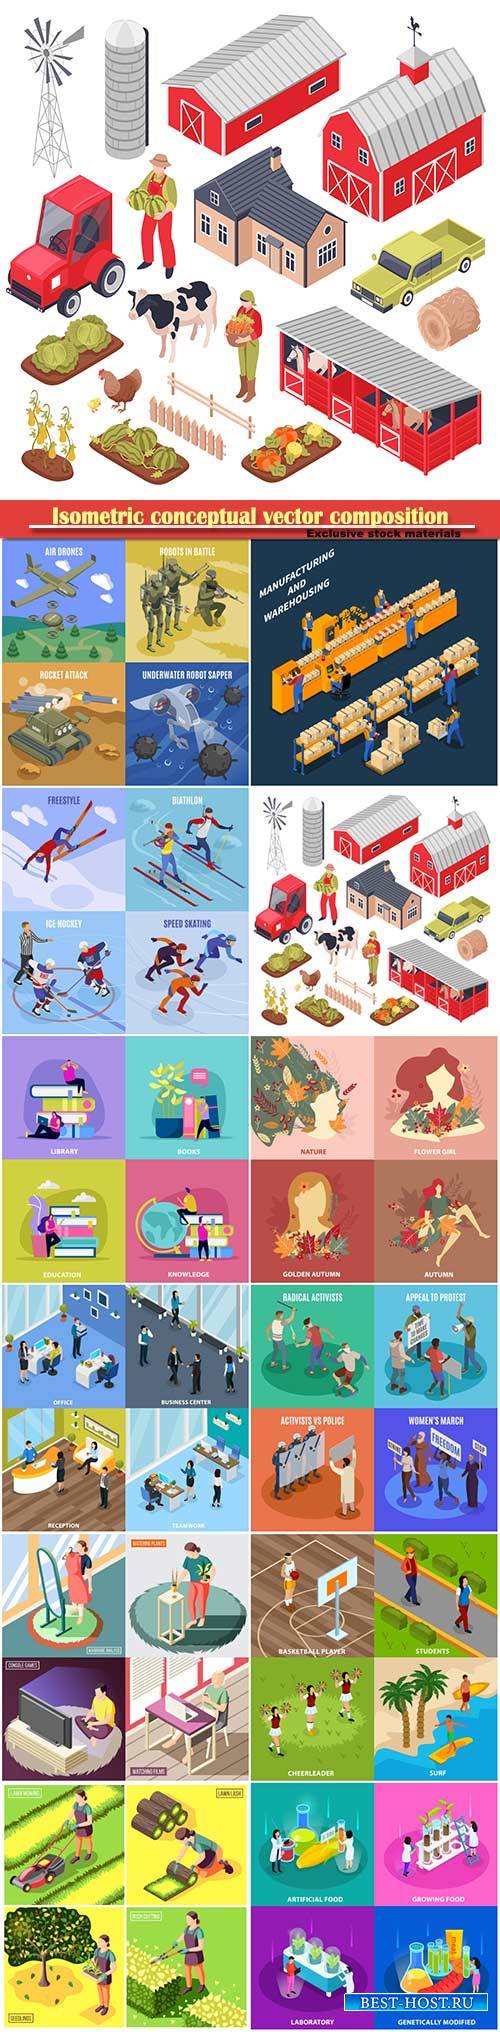 Isometric conceptual vector composition, infographics template # 73